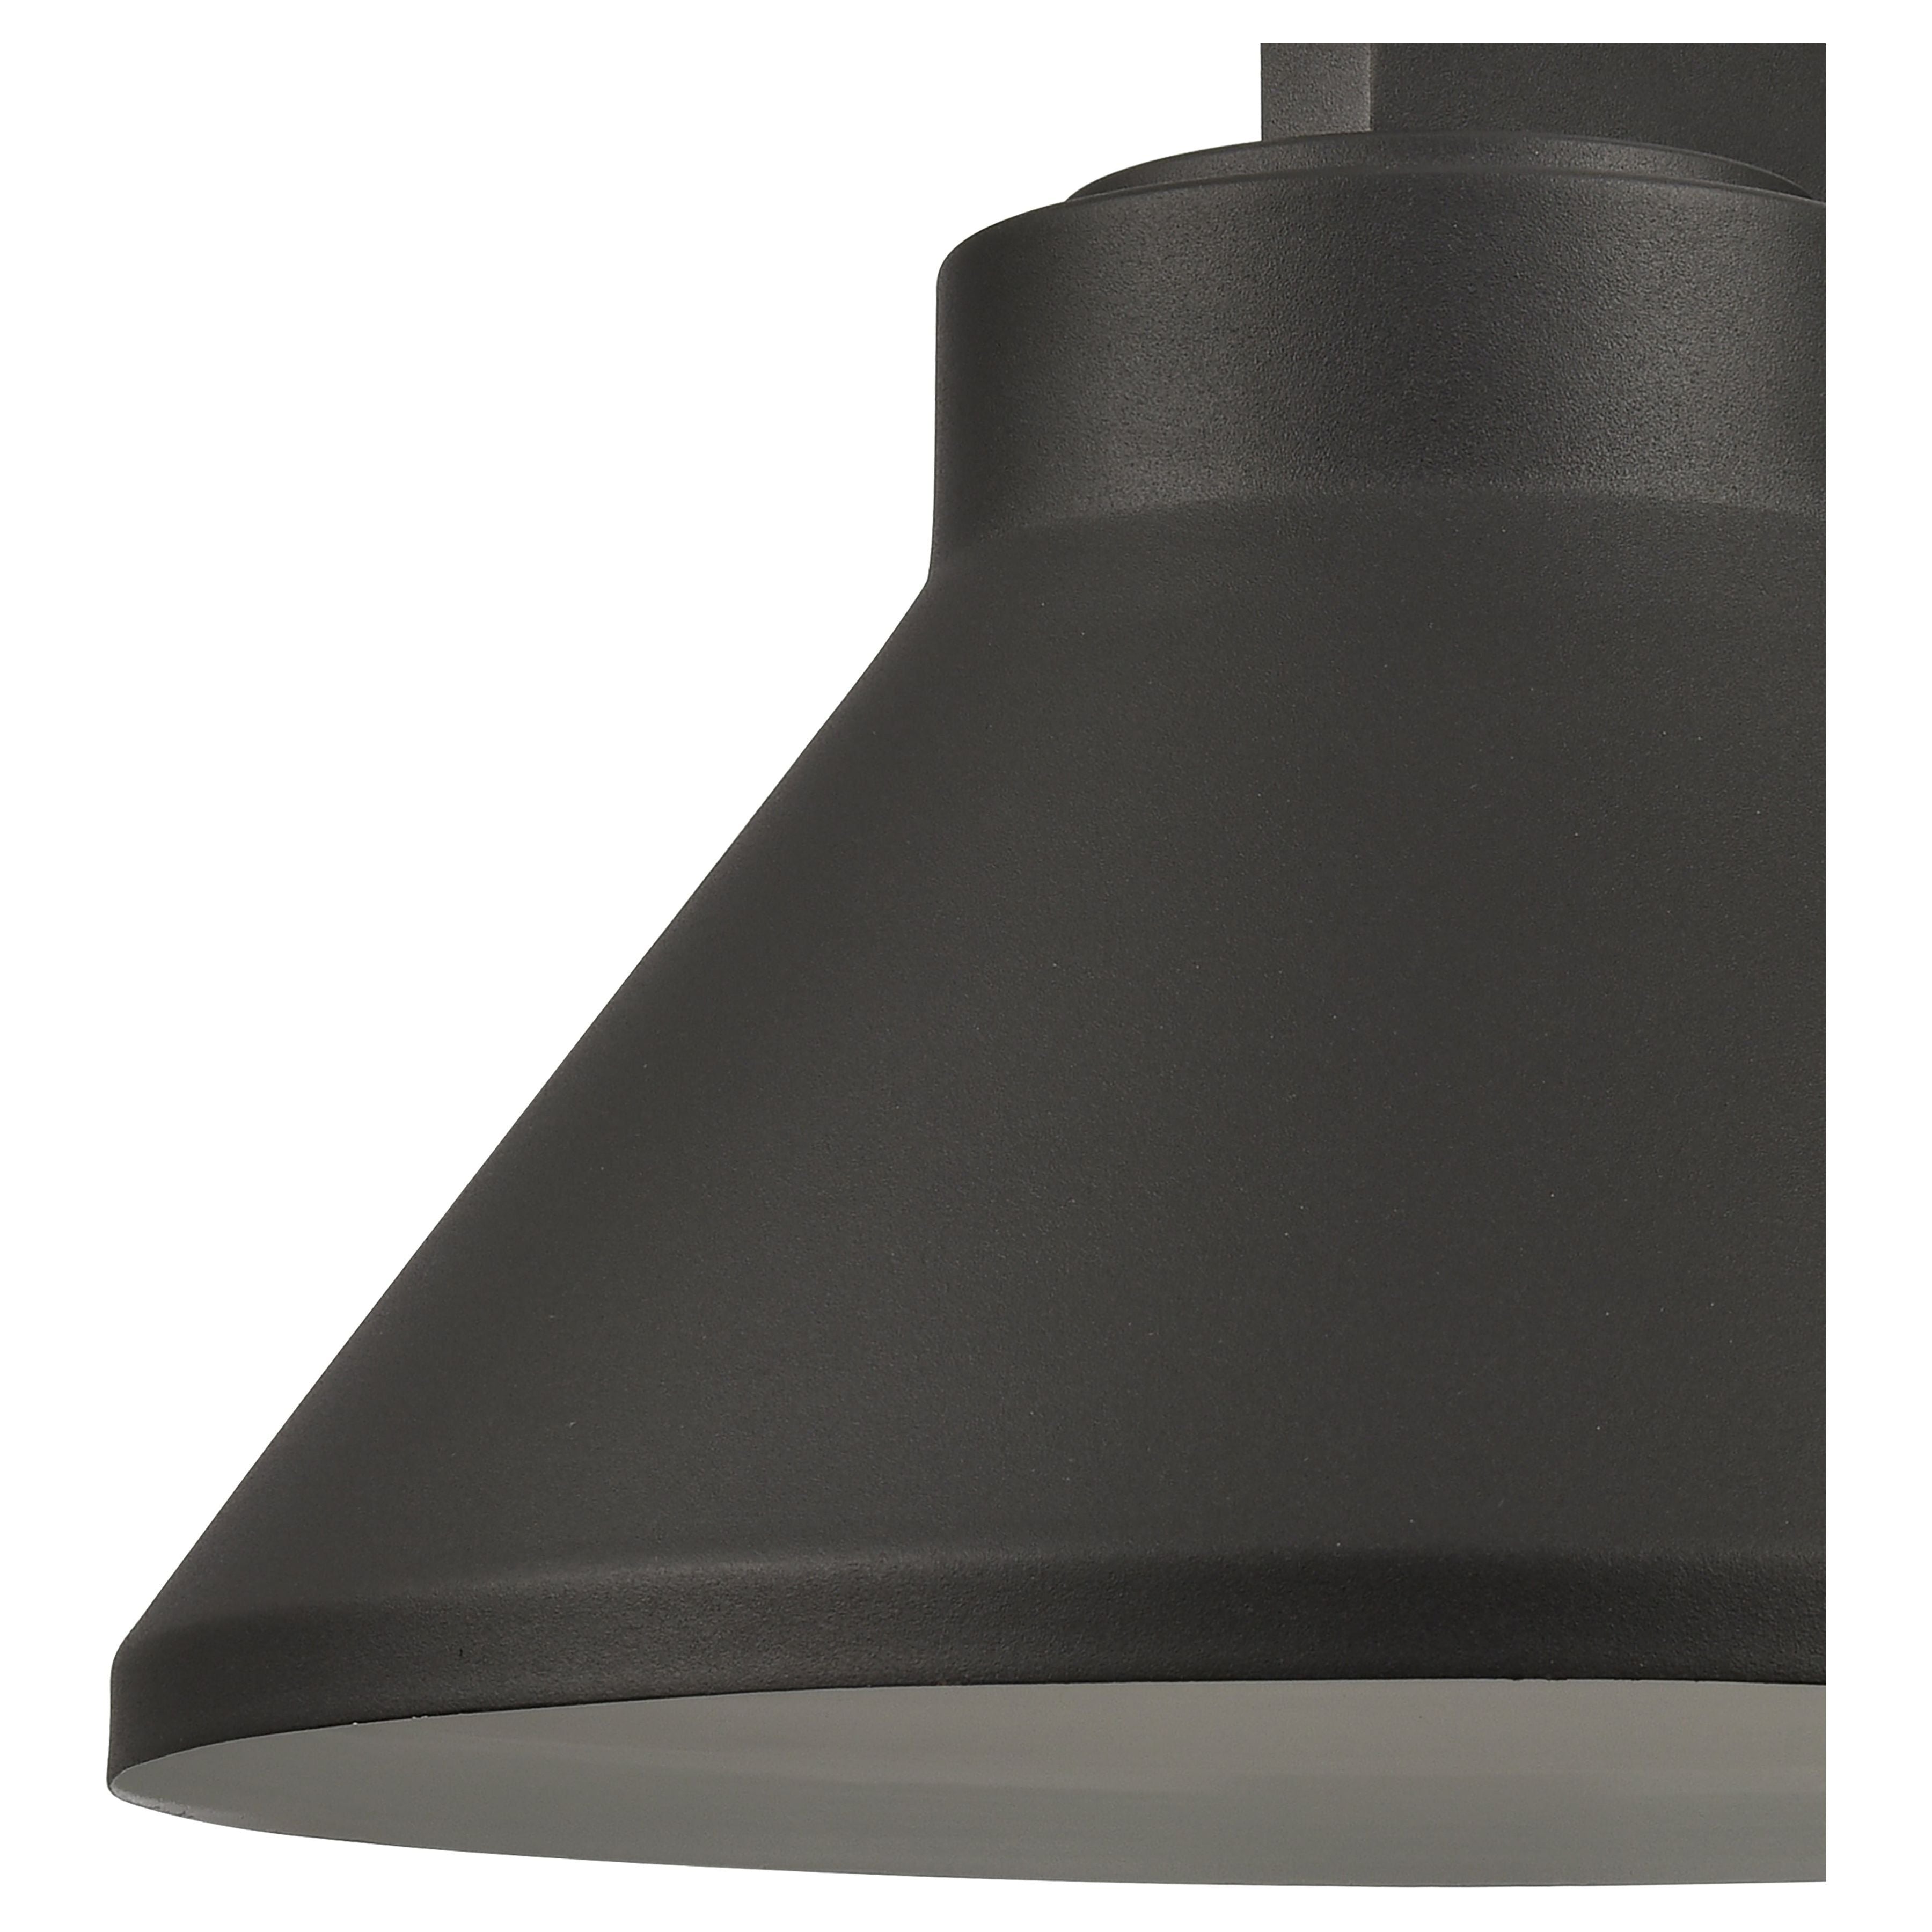 Thane 8.25" High 1-Light Outdoor Sconce